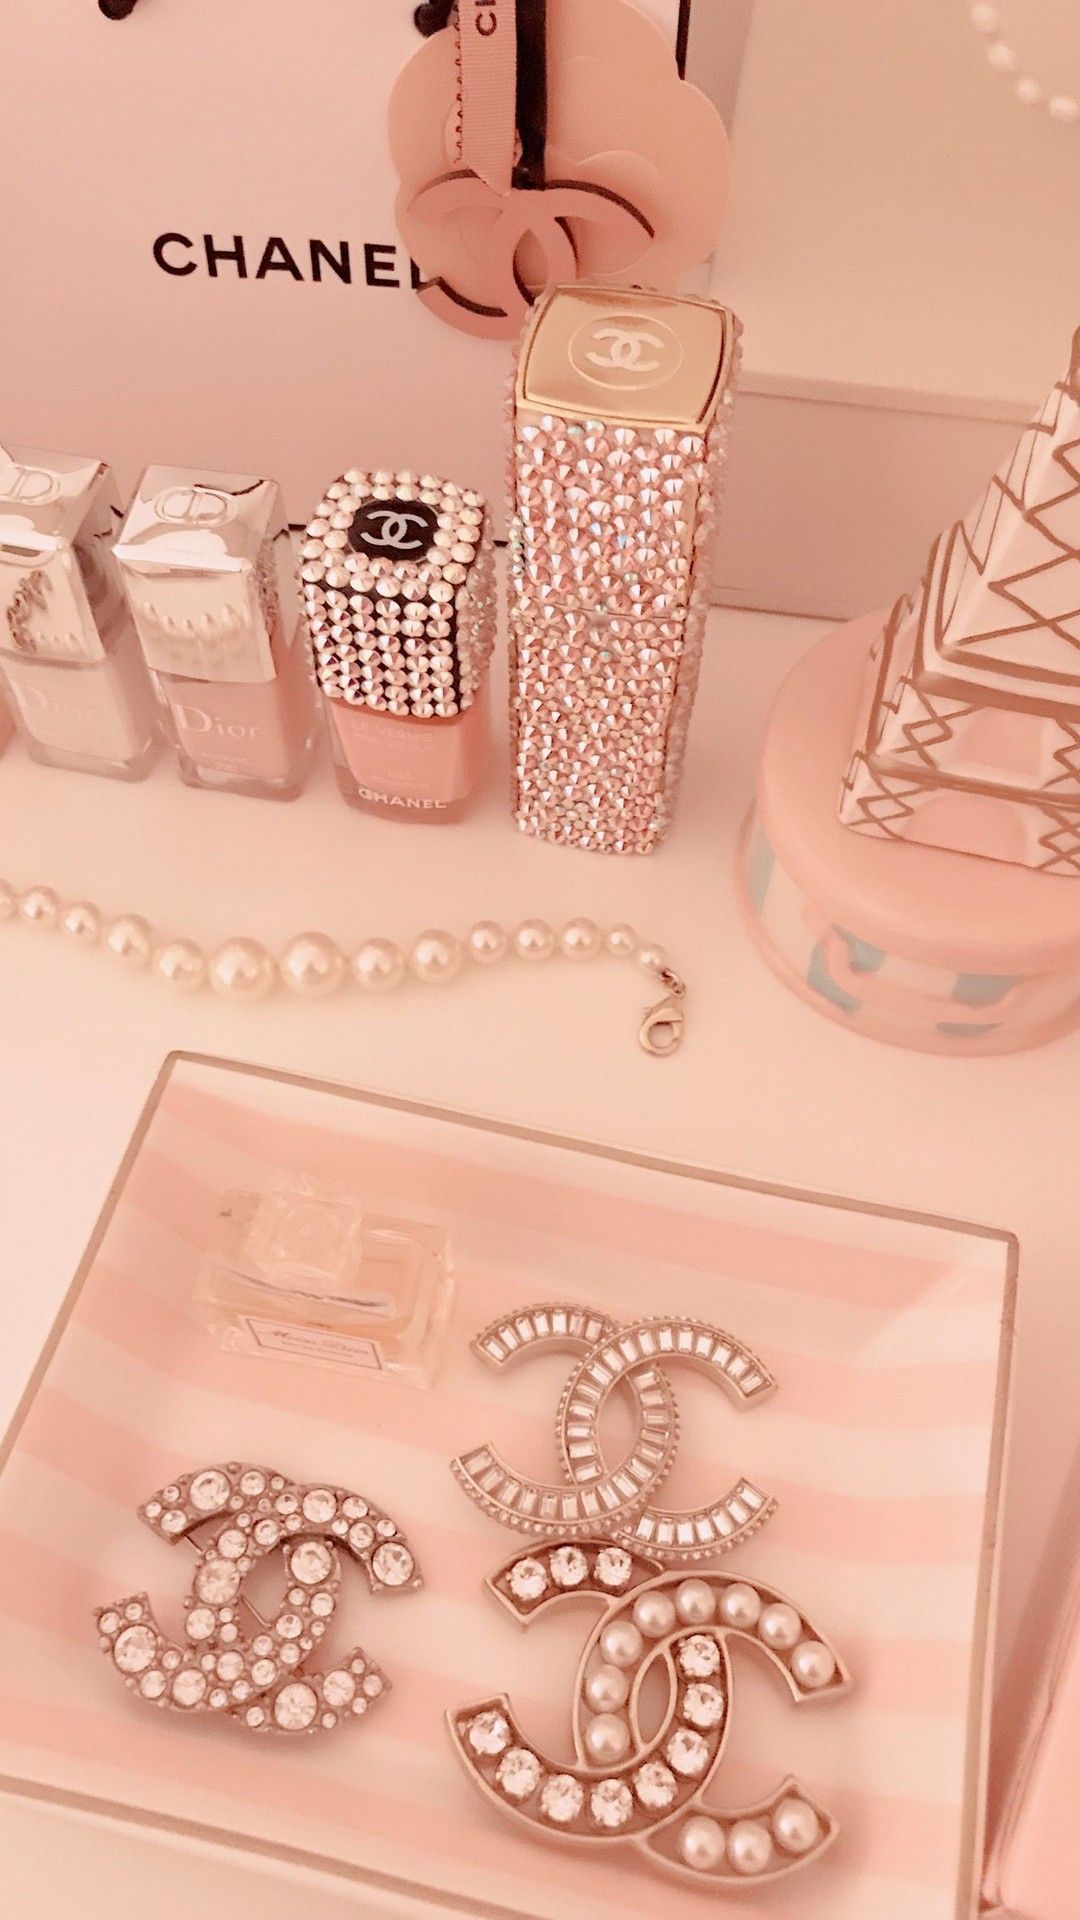 A Chanel makeup bag and Chanel products on a table - Dior